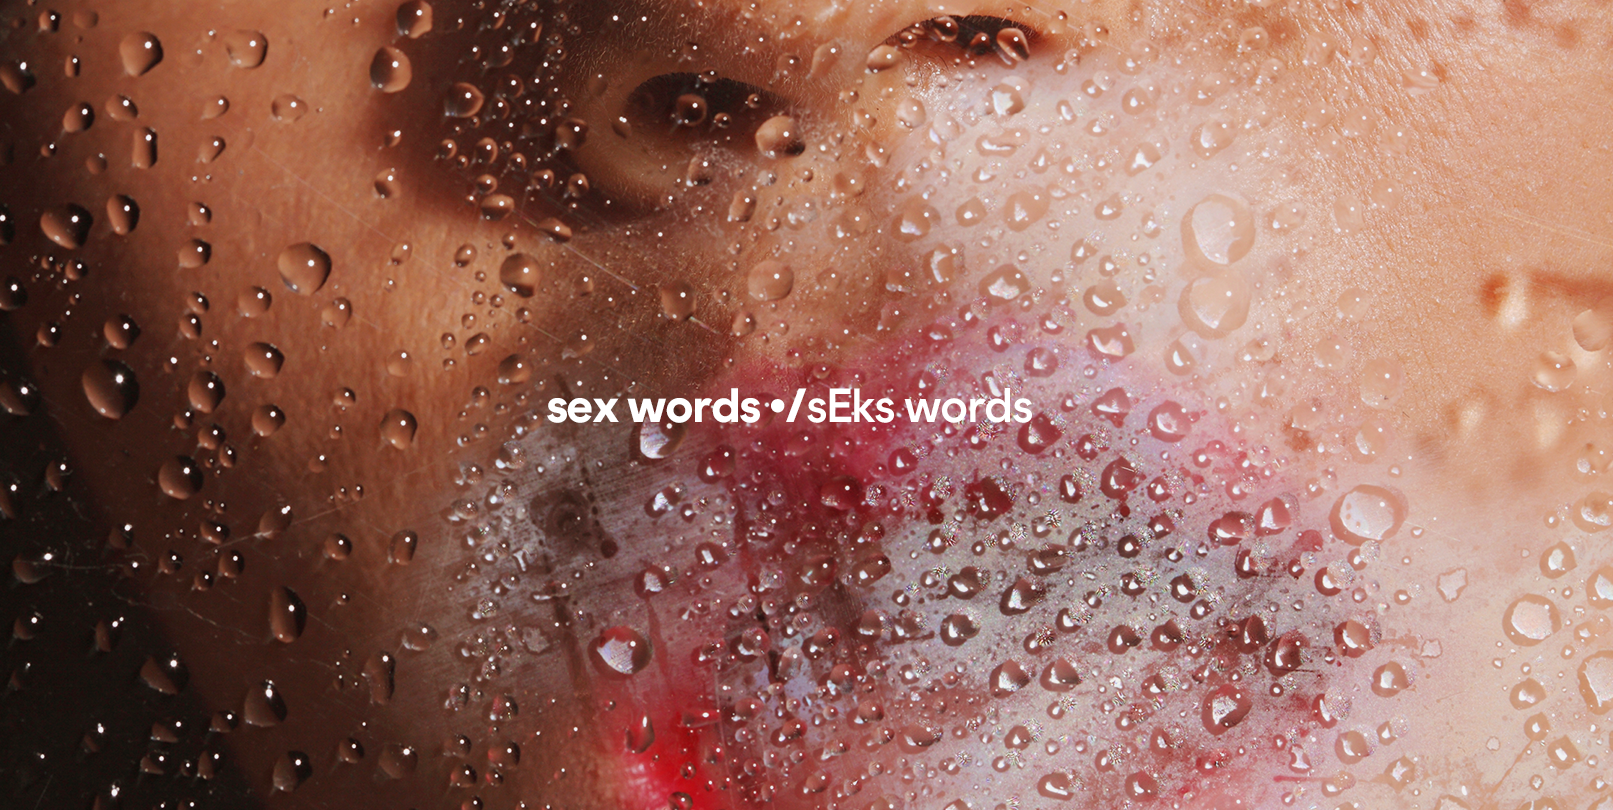 32 Old Sexcom - 111 Sex Words to Know - Sex Slang Glossary and Lingo Definitions